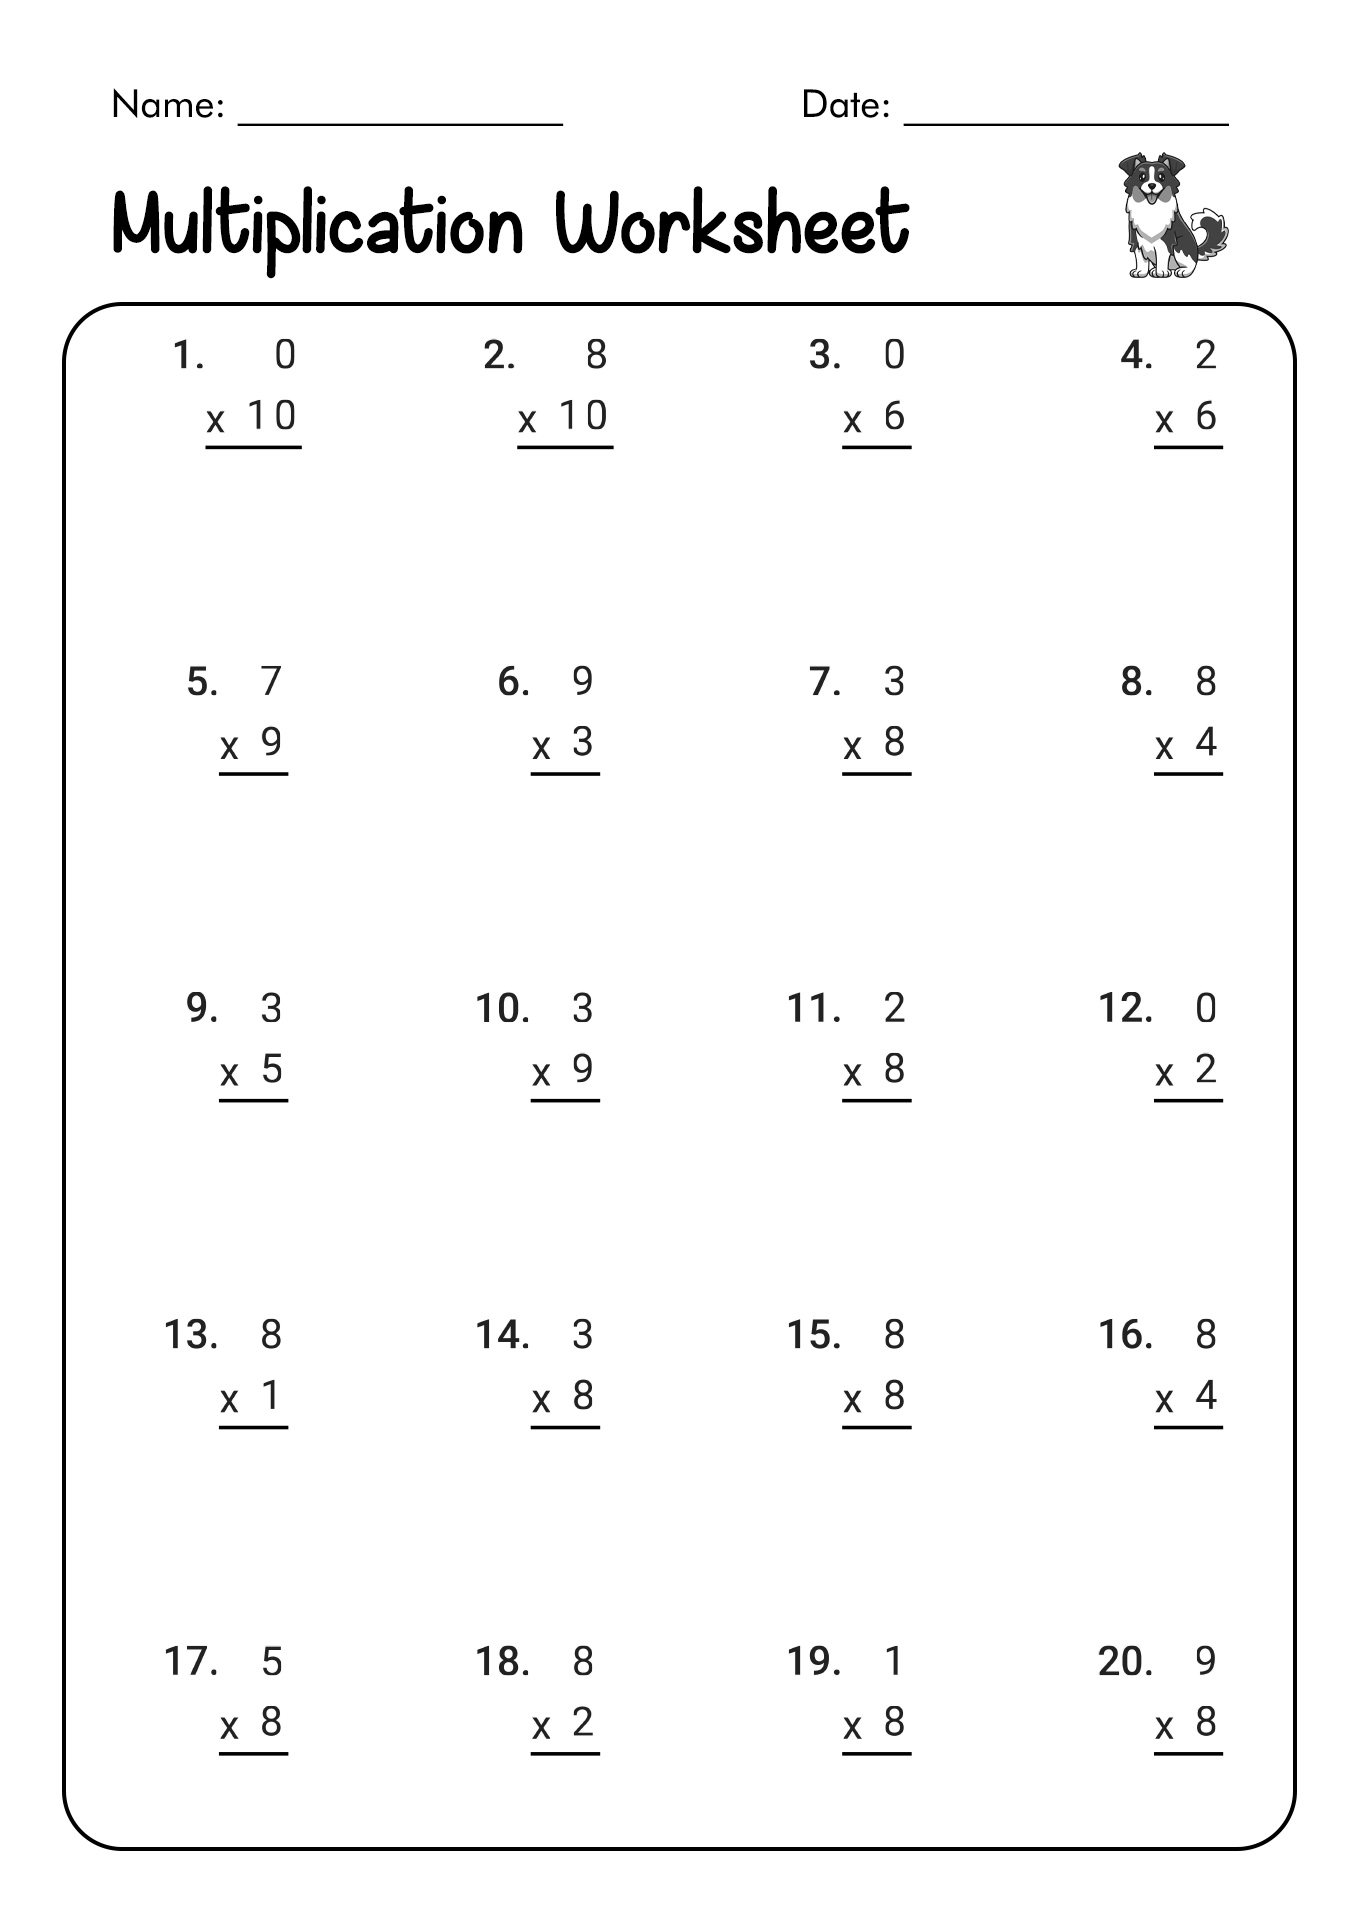 Multiplication Facts Worksheets 5s